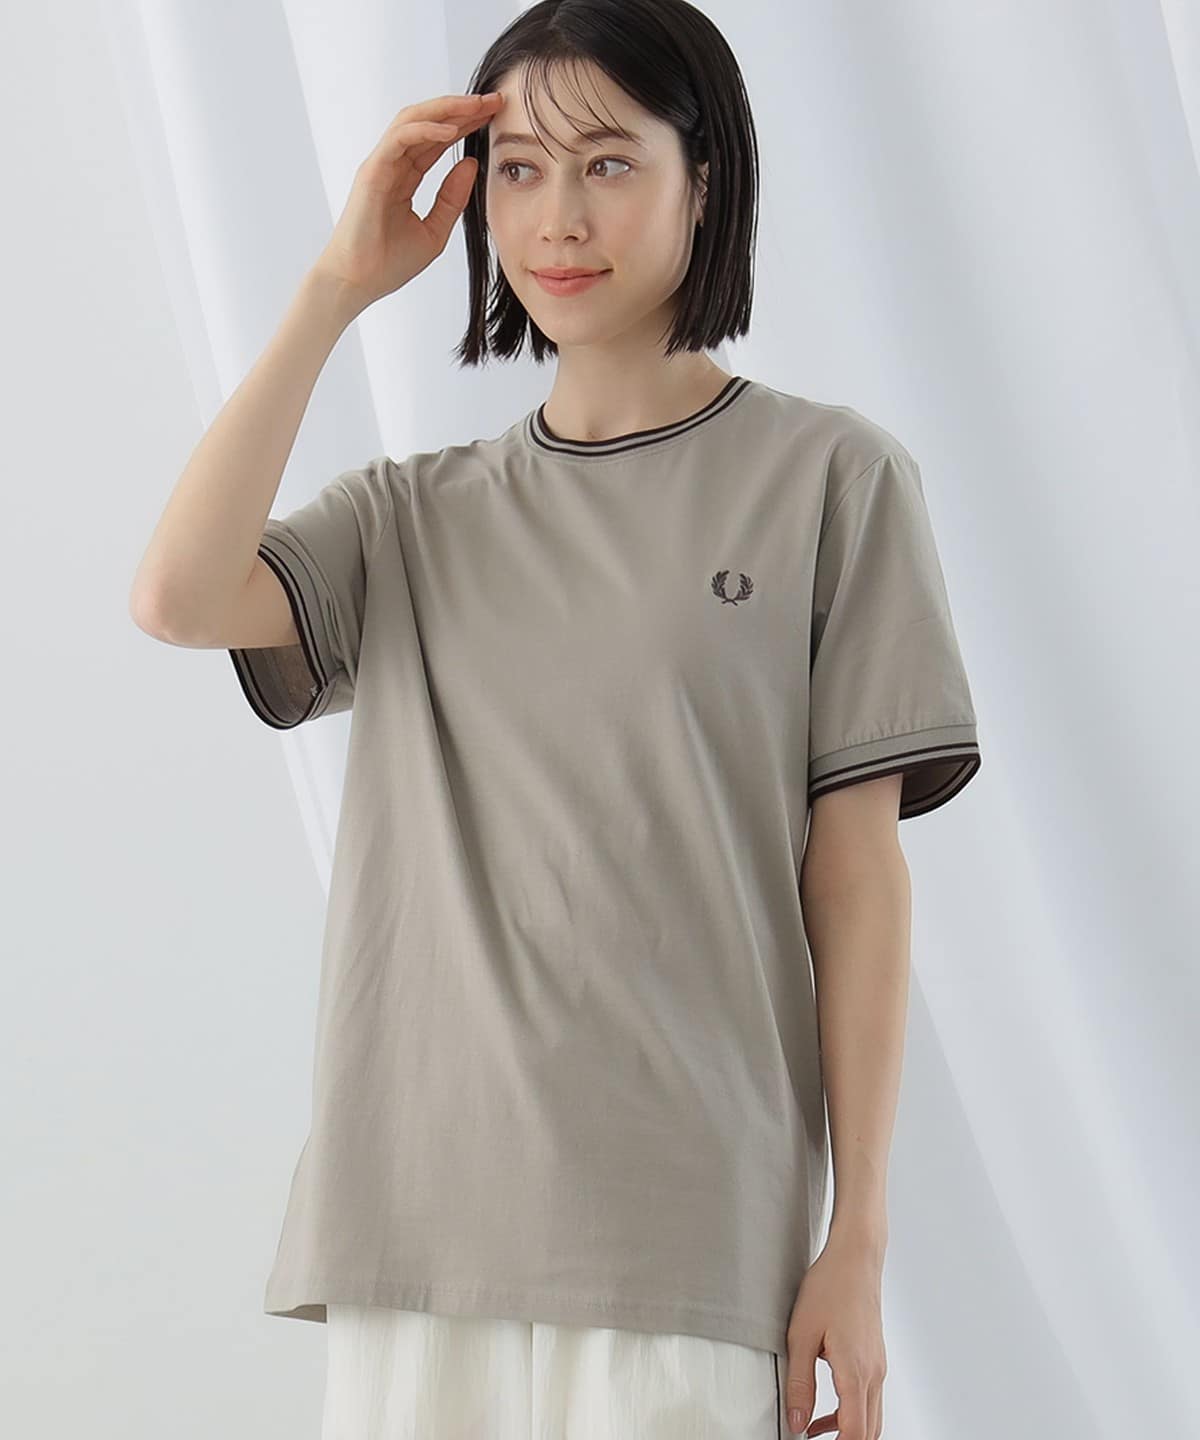 Ray BEAMS (Ray BEAMS) [WEB Limited] FRED PERRY / Twin Tipped T 